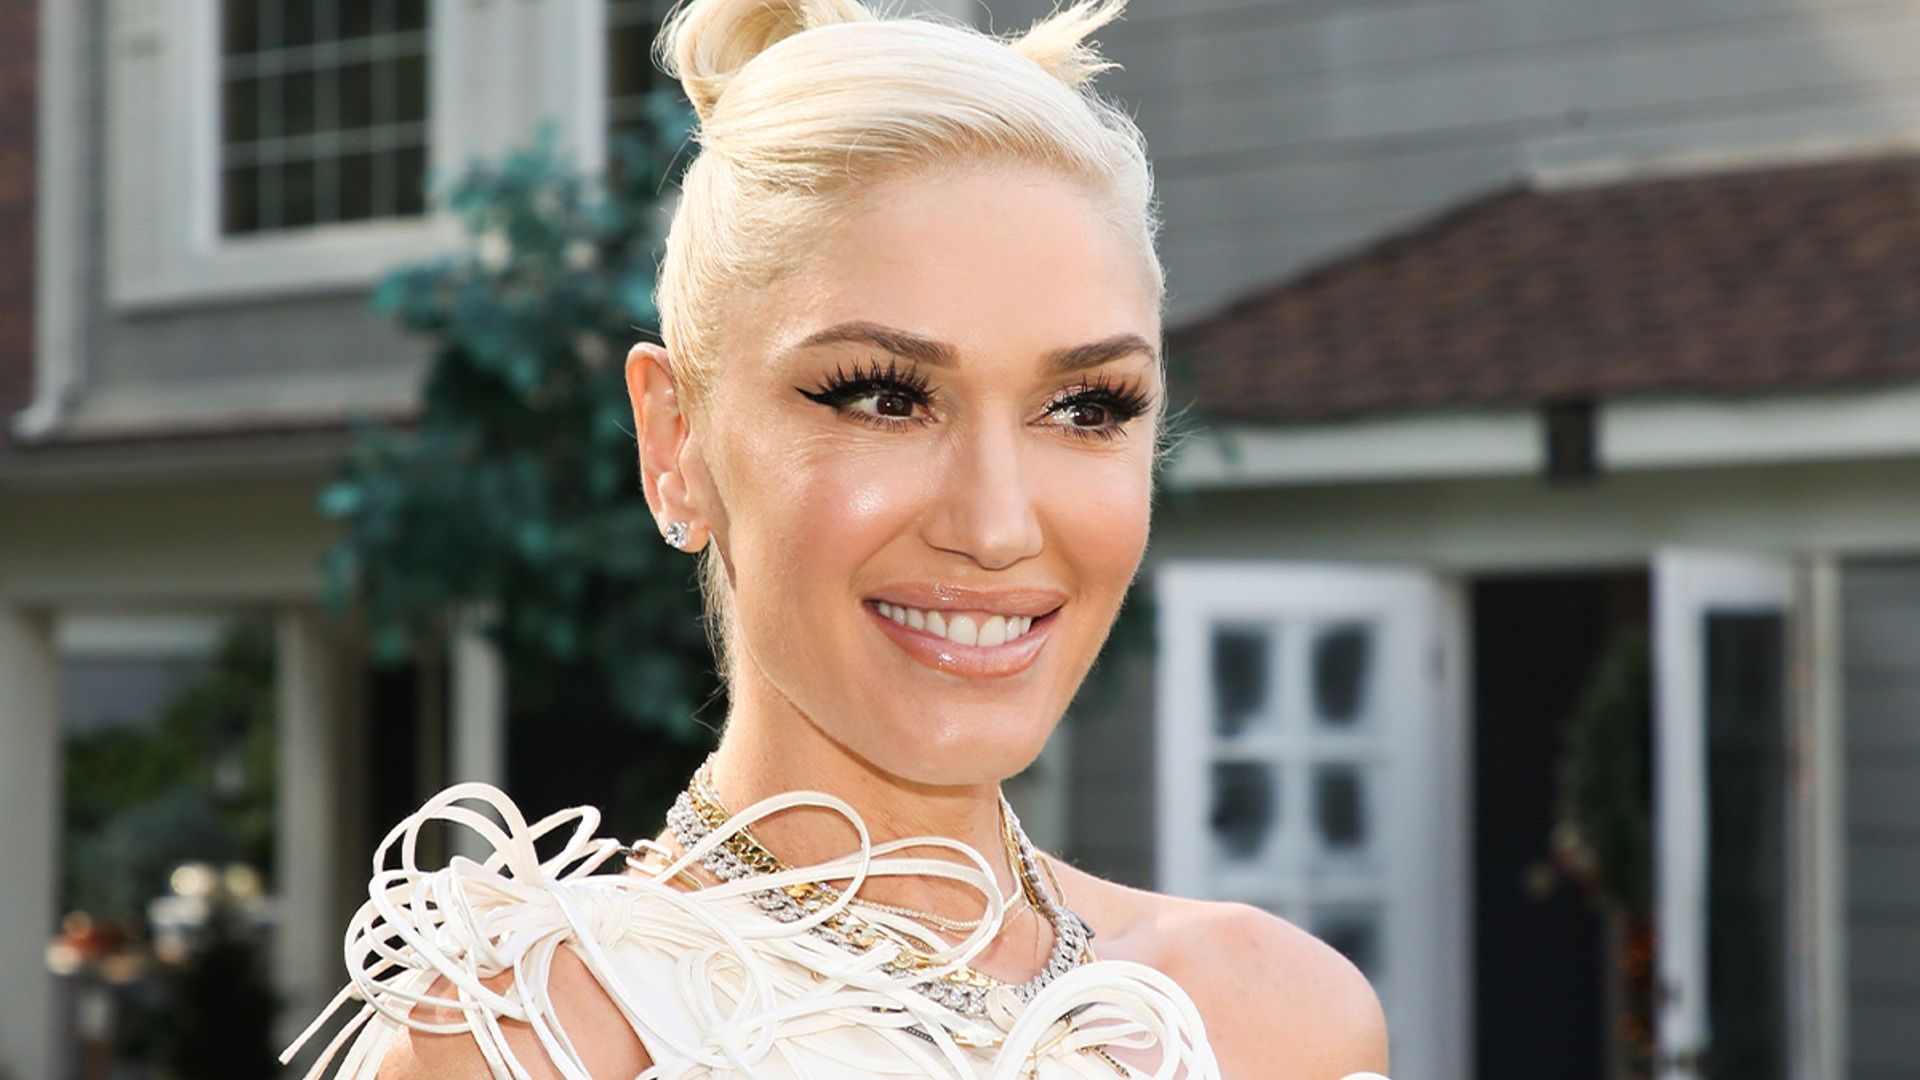 Gwen Stefani reveals real feelings about 'really small' ranch wedding